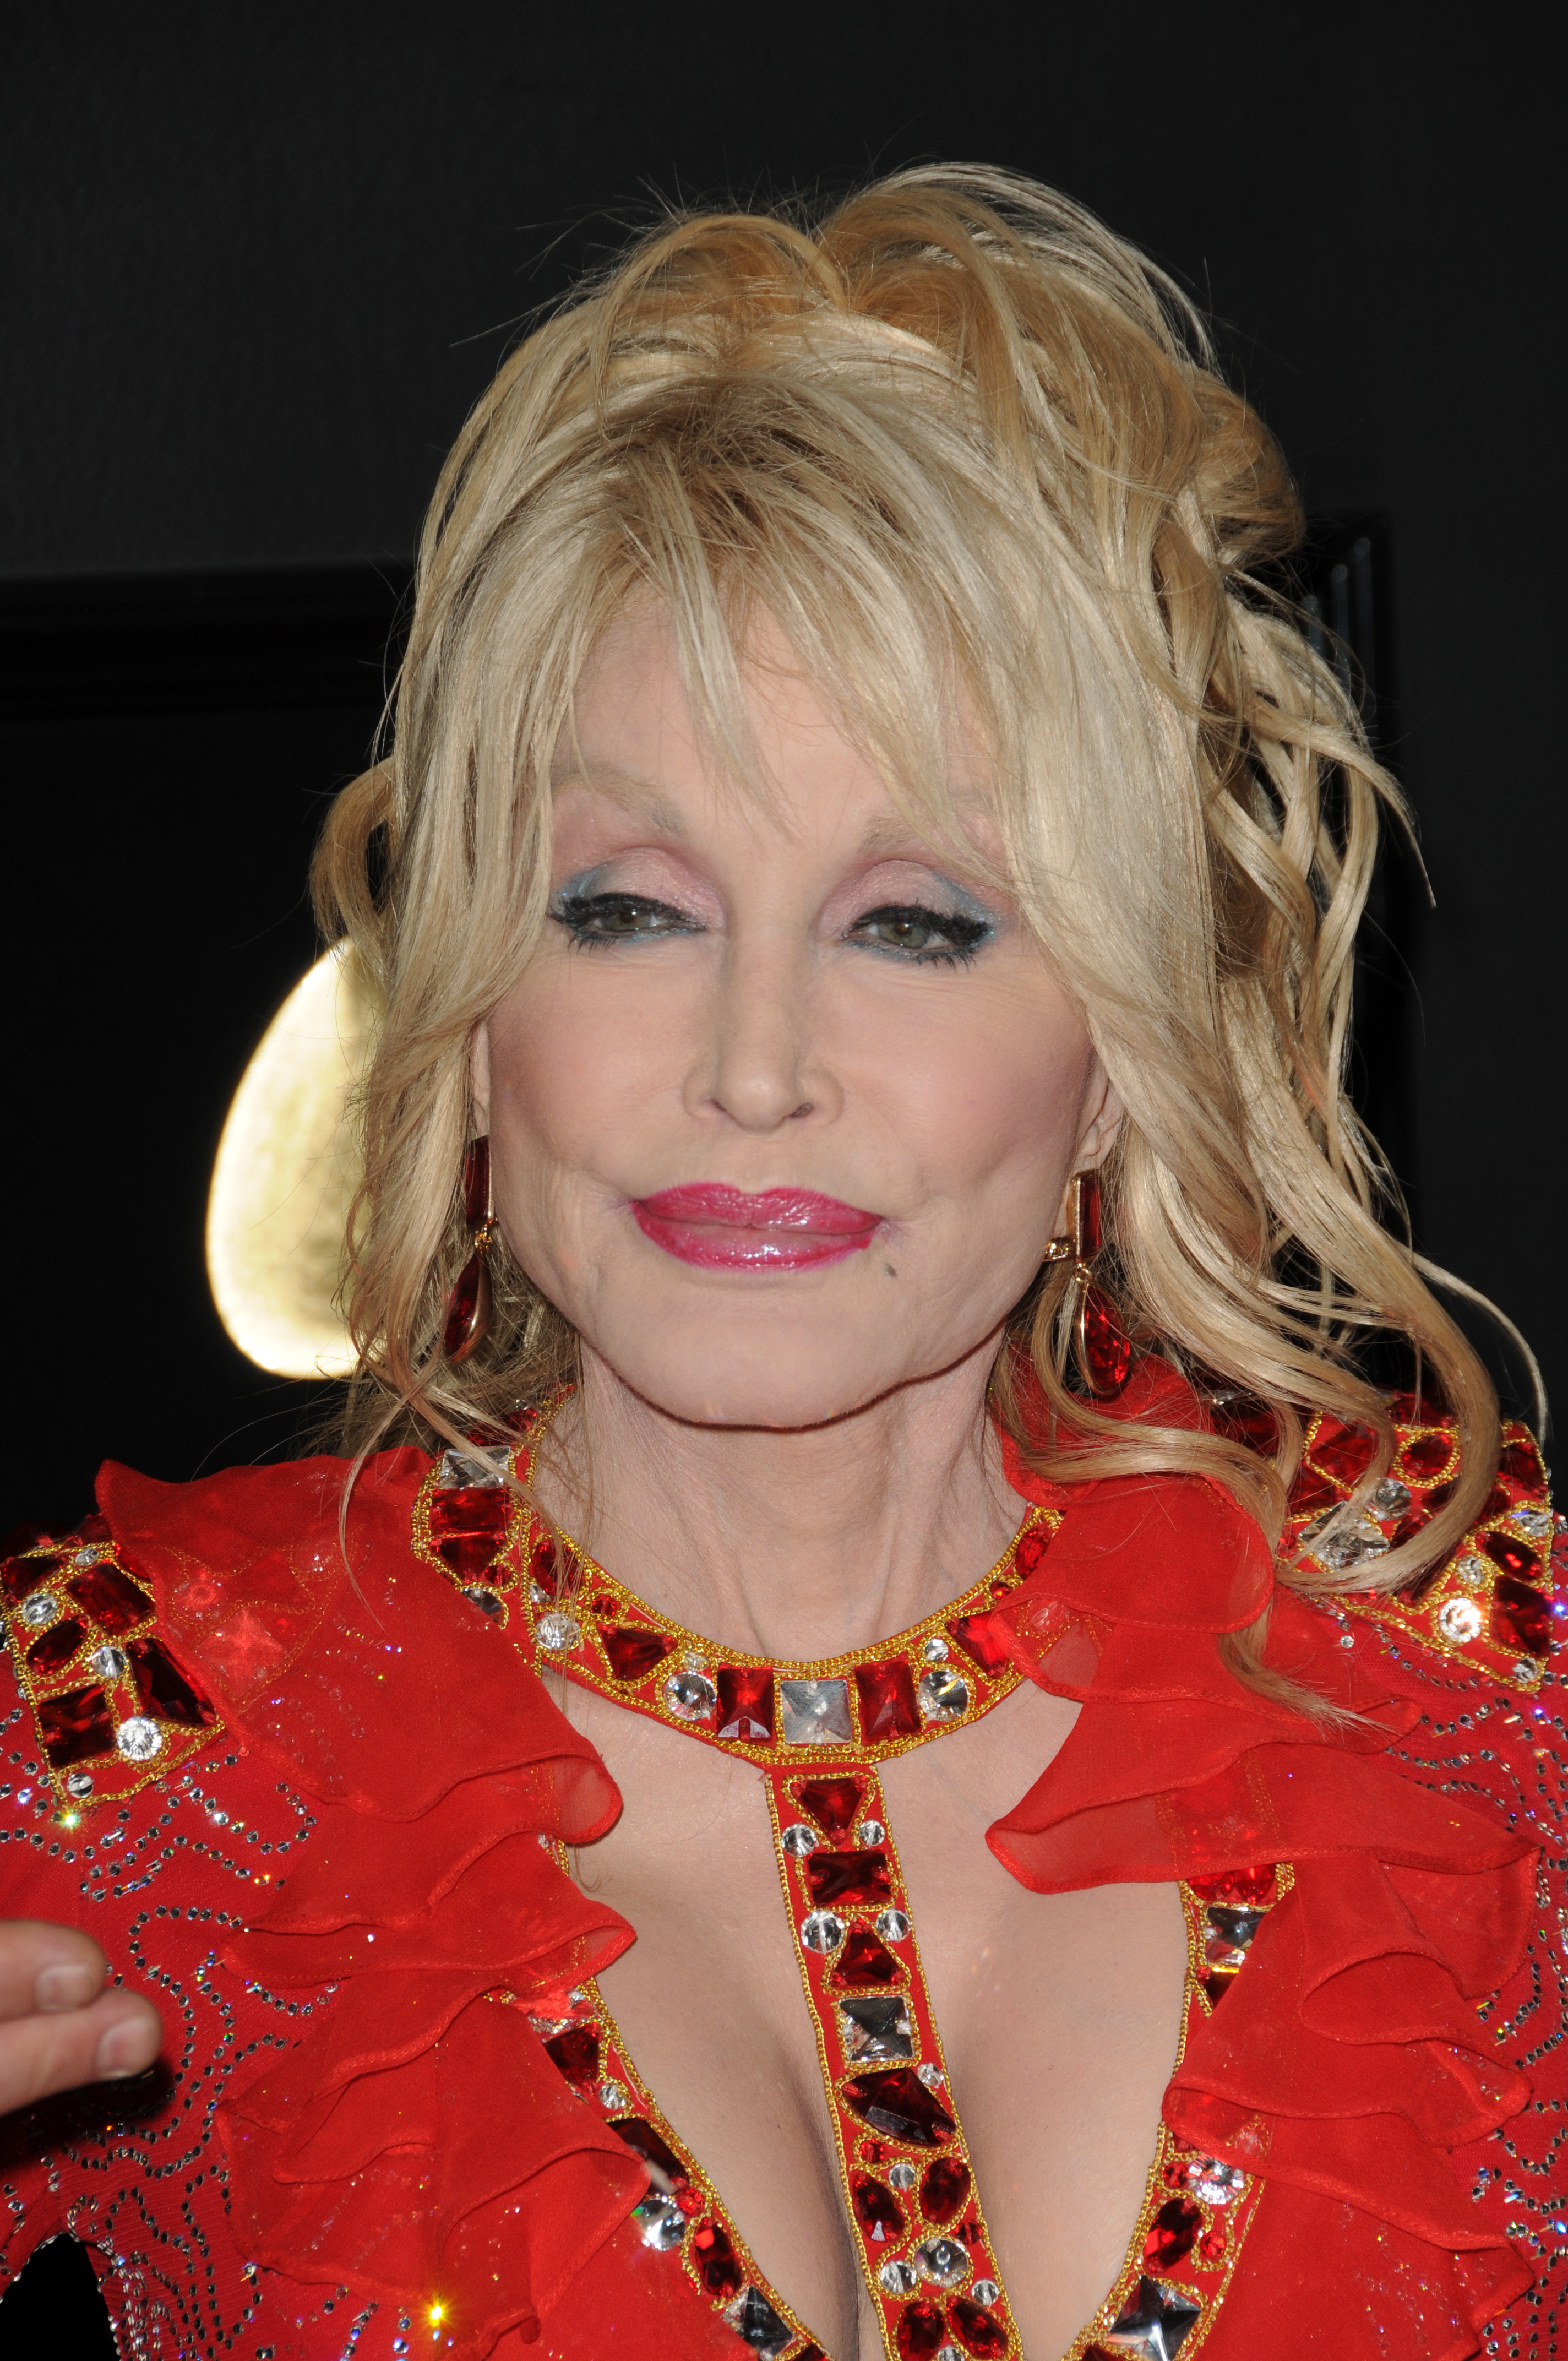 Dolly Parton in a red outfit. 